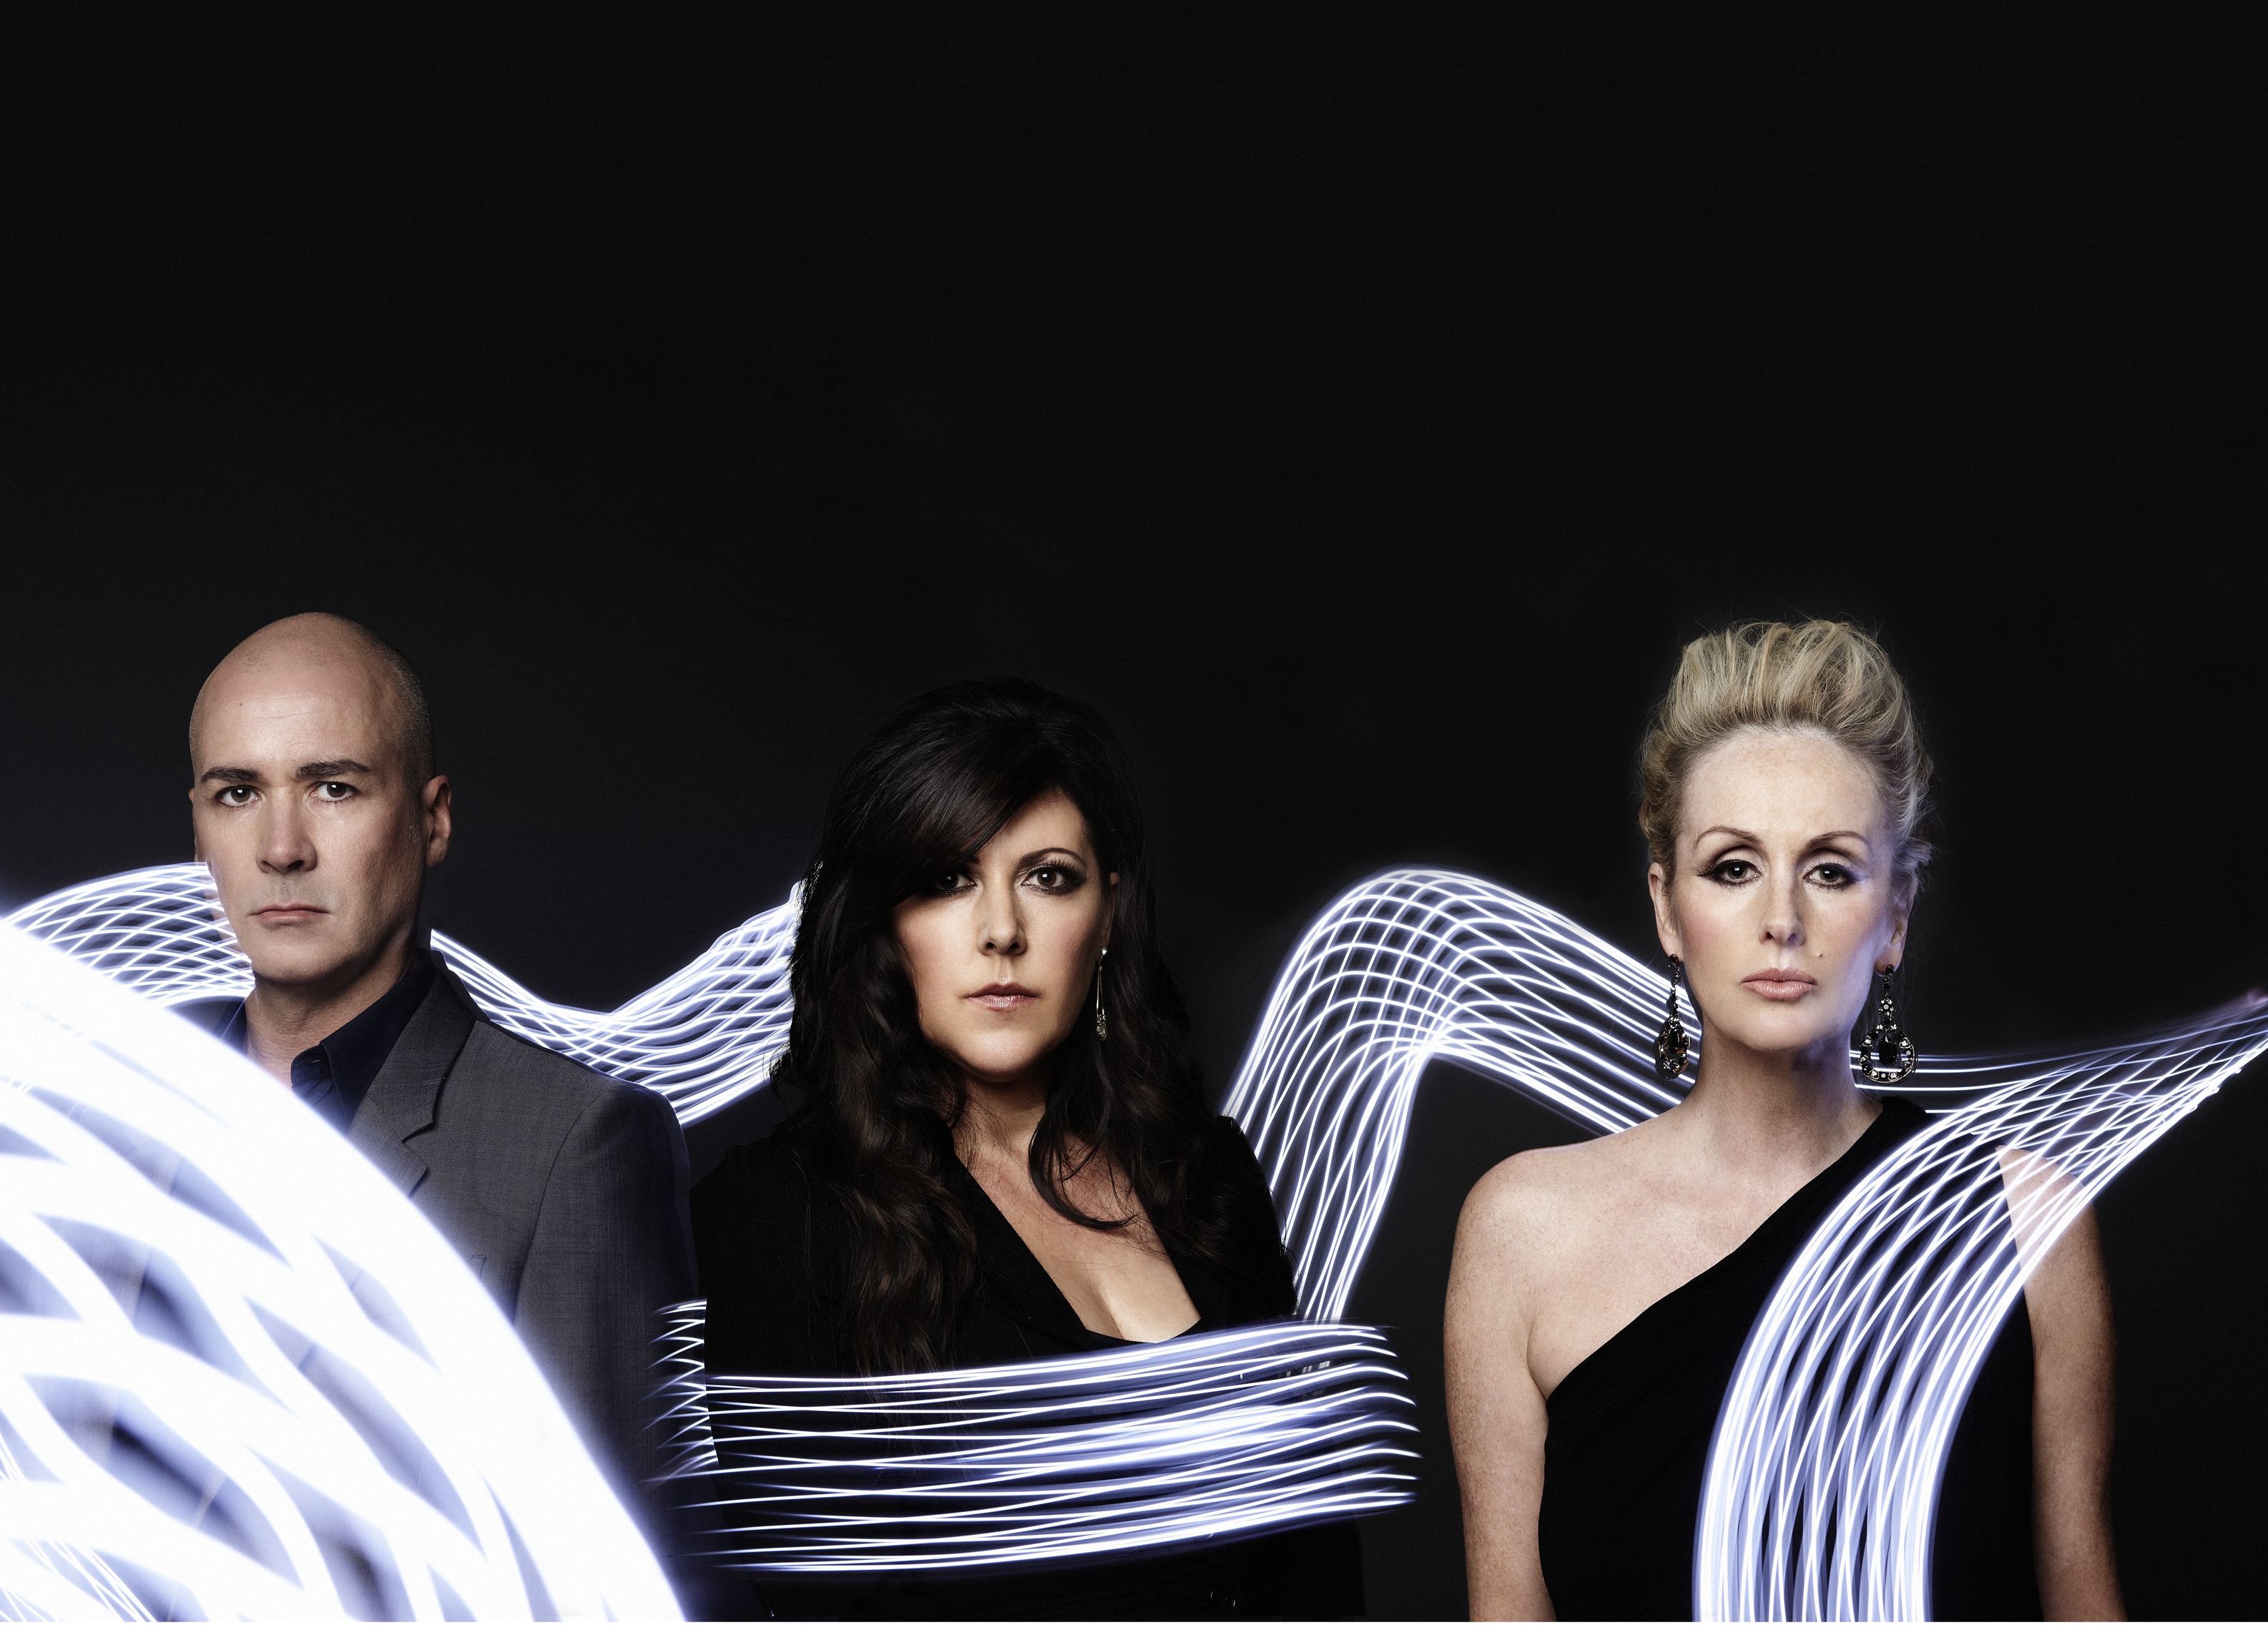 The Human League – Phil Oakey, Susan Ann Sulley and Joanne Catherall